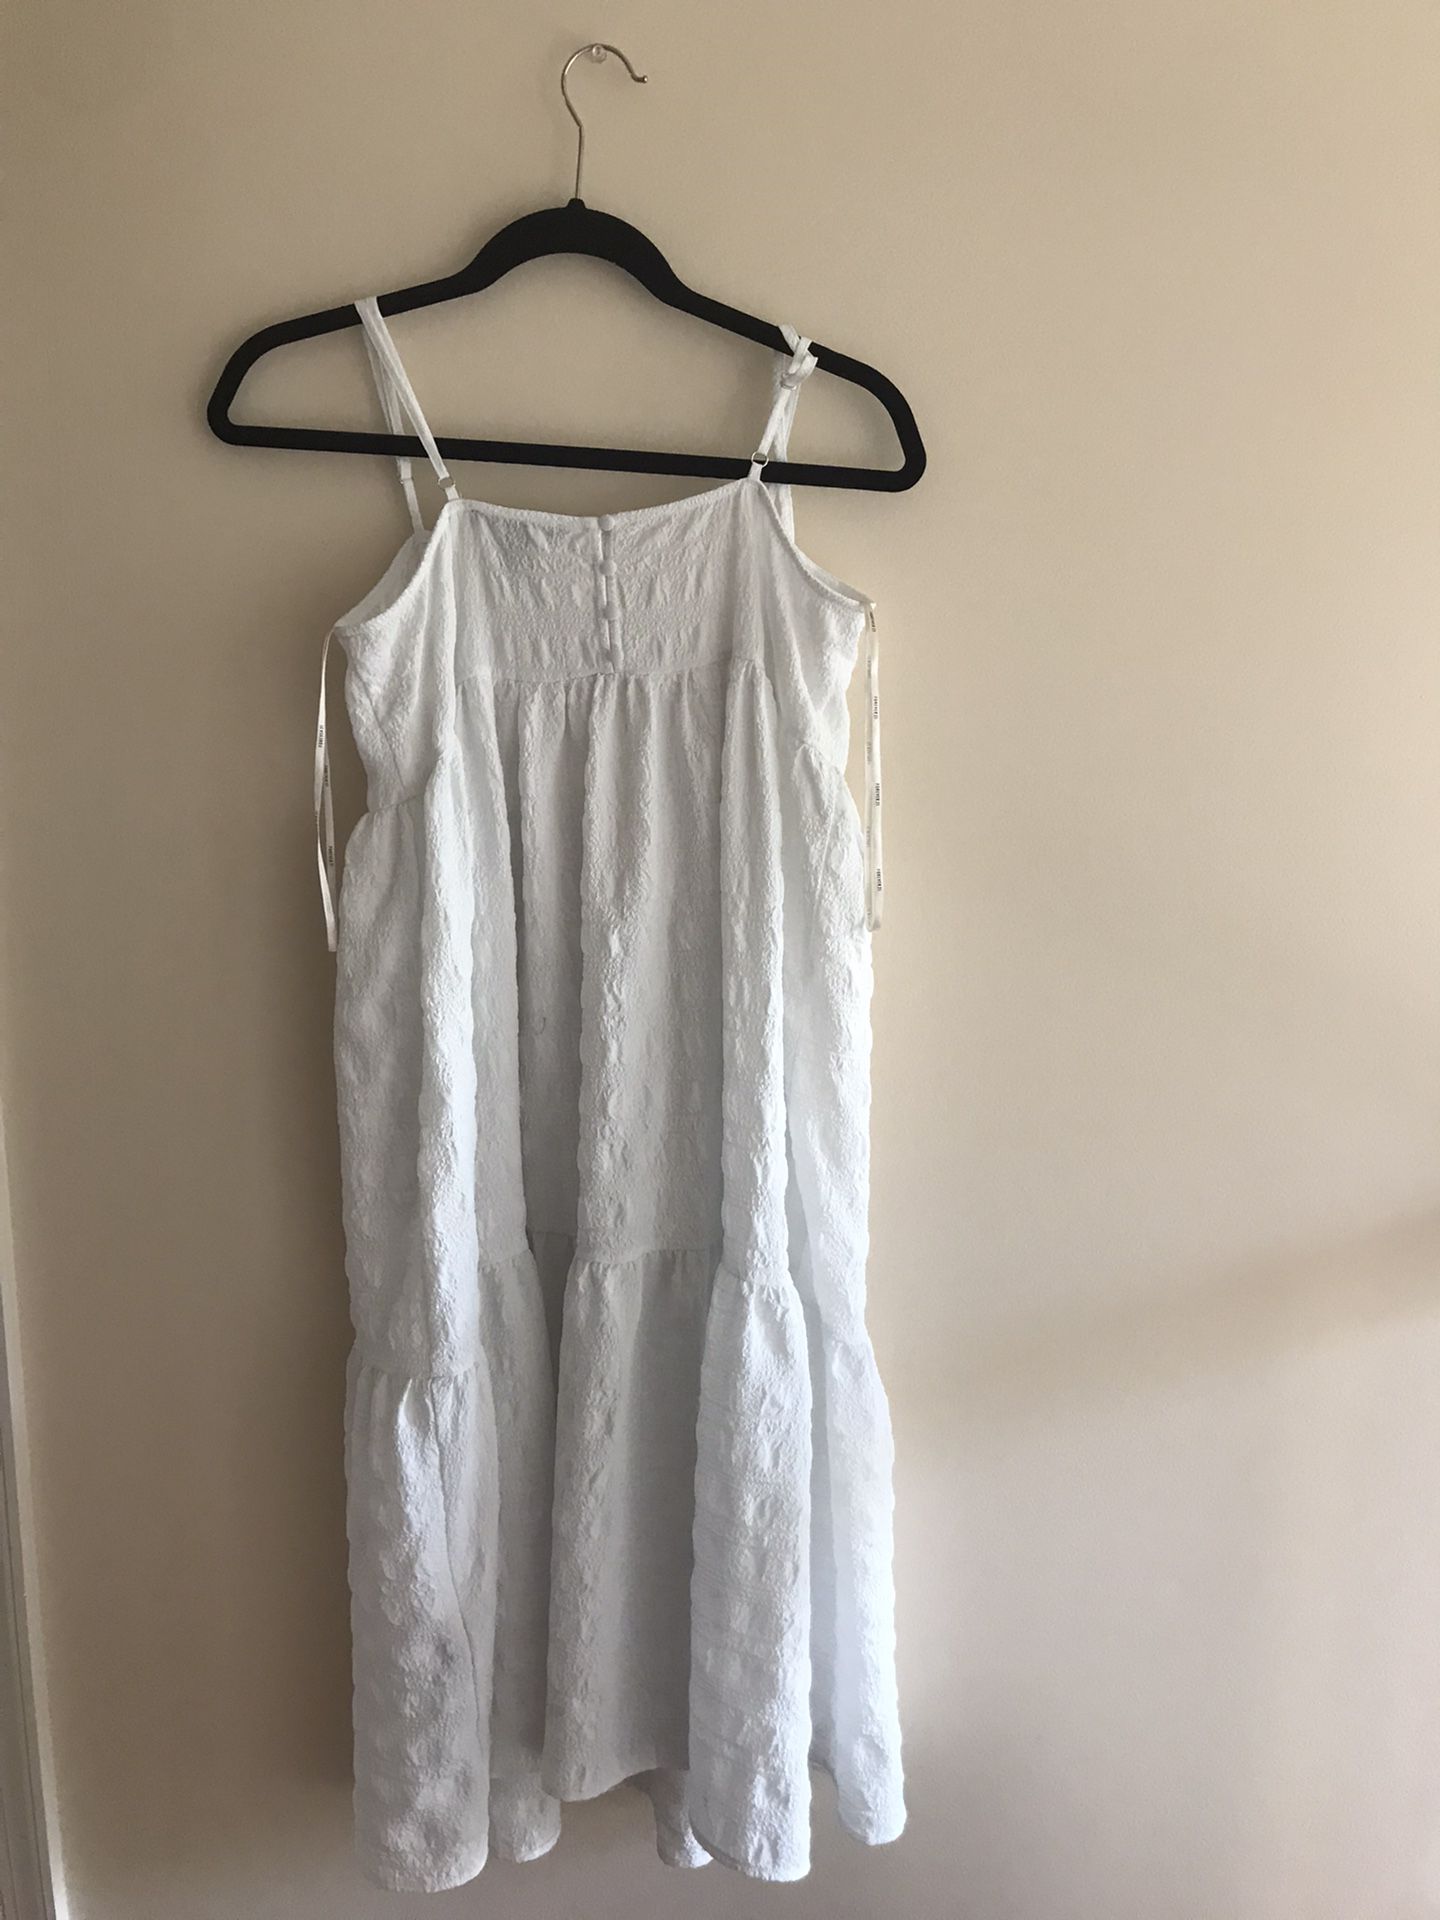 Cute dress for spring